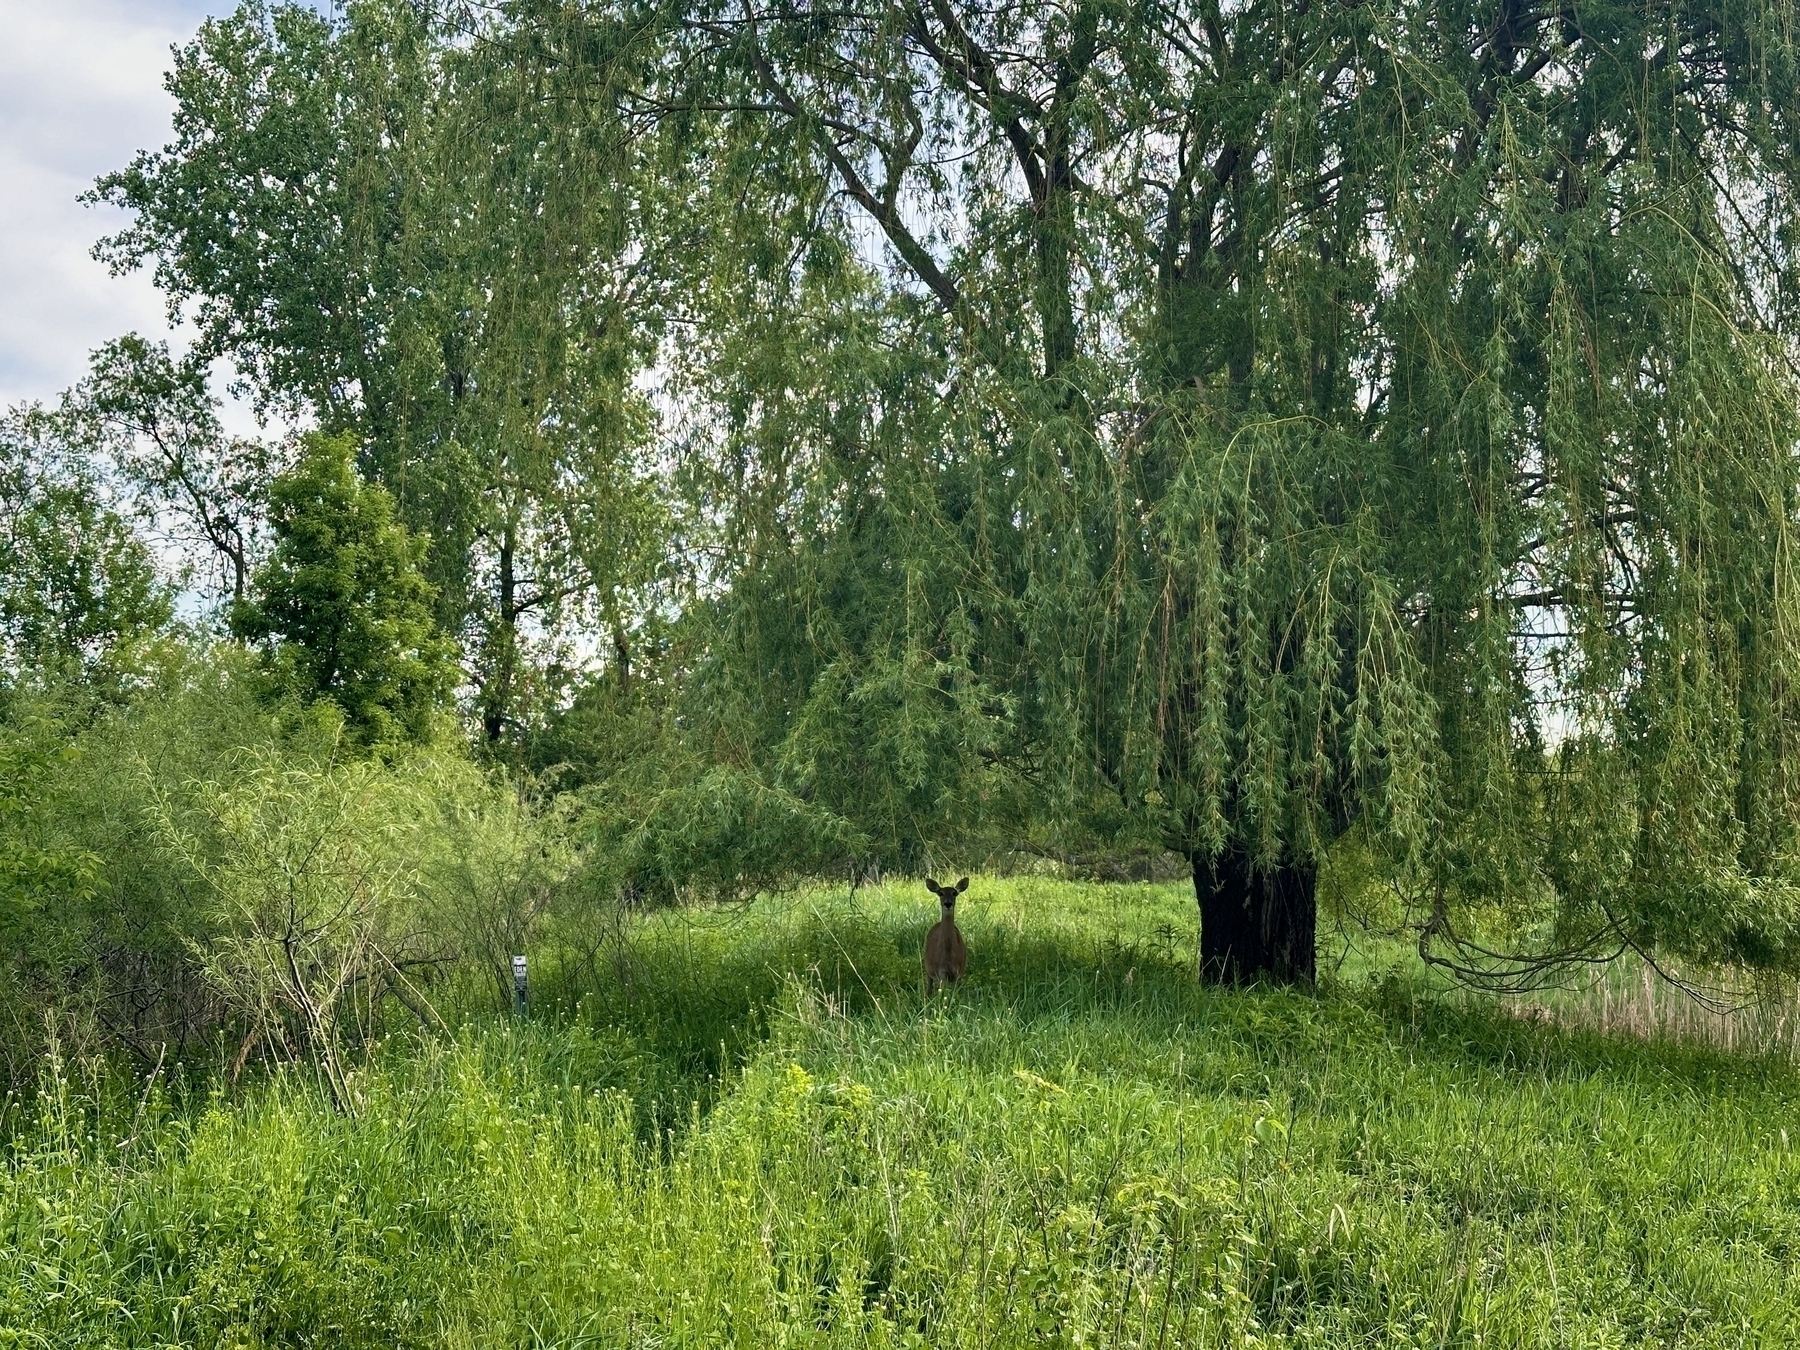 A deer stands alert in a grassy field surrounded by dense greenery under a large tree with hanging branches on a cloudy day.